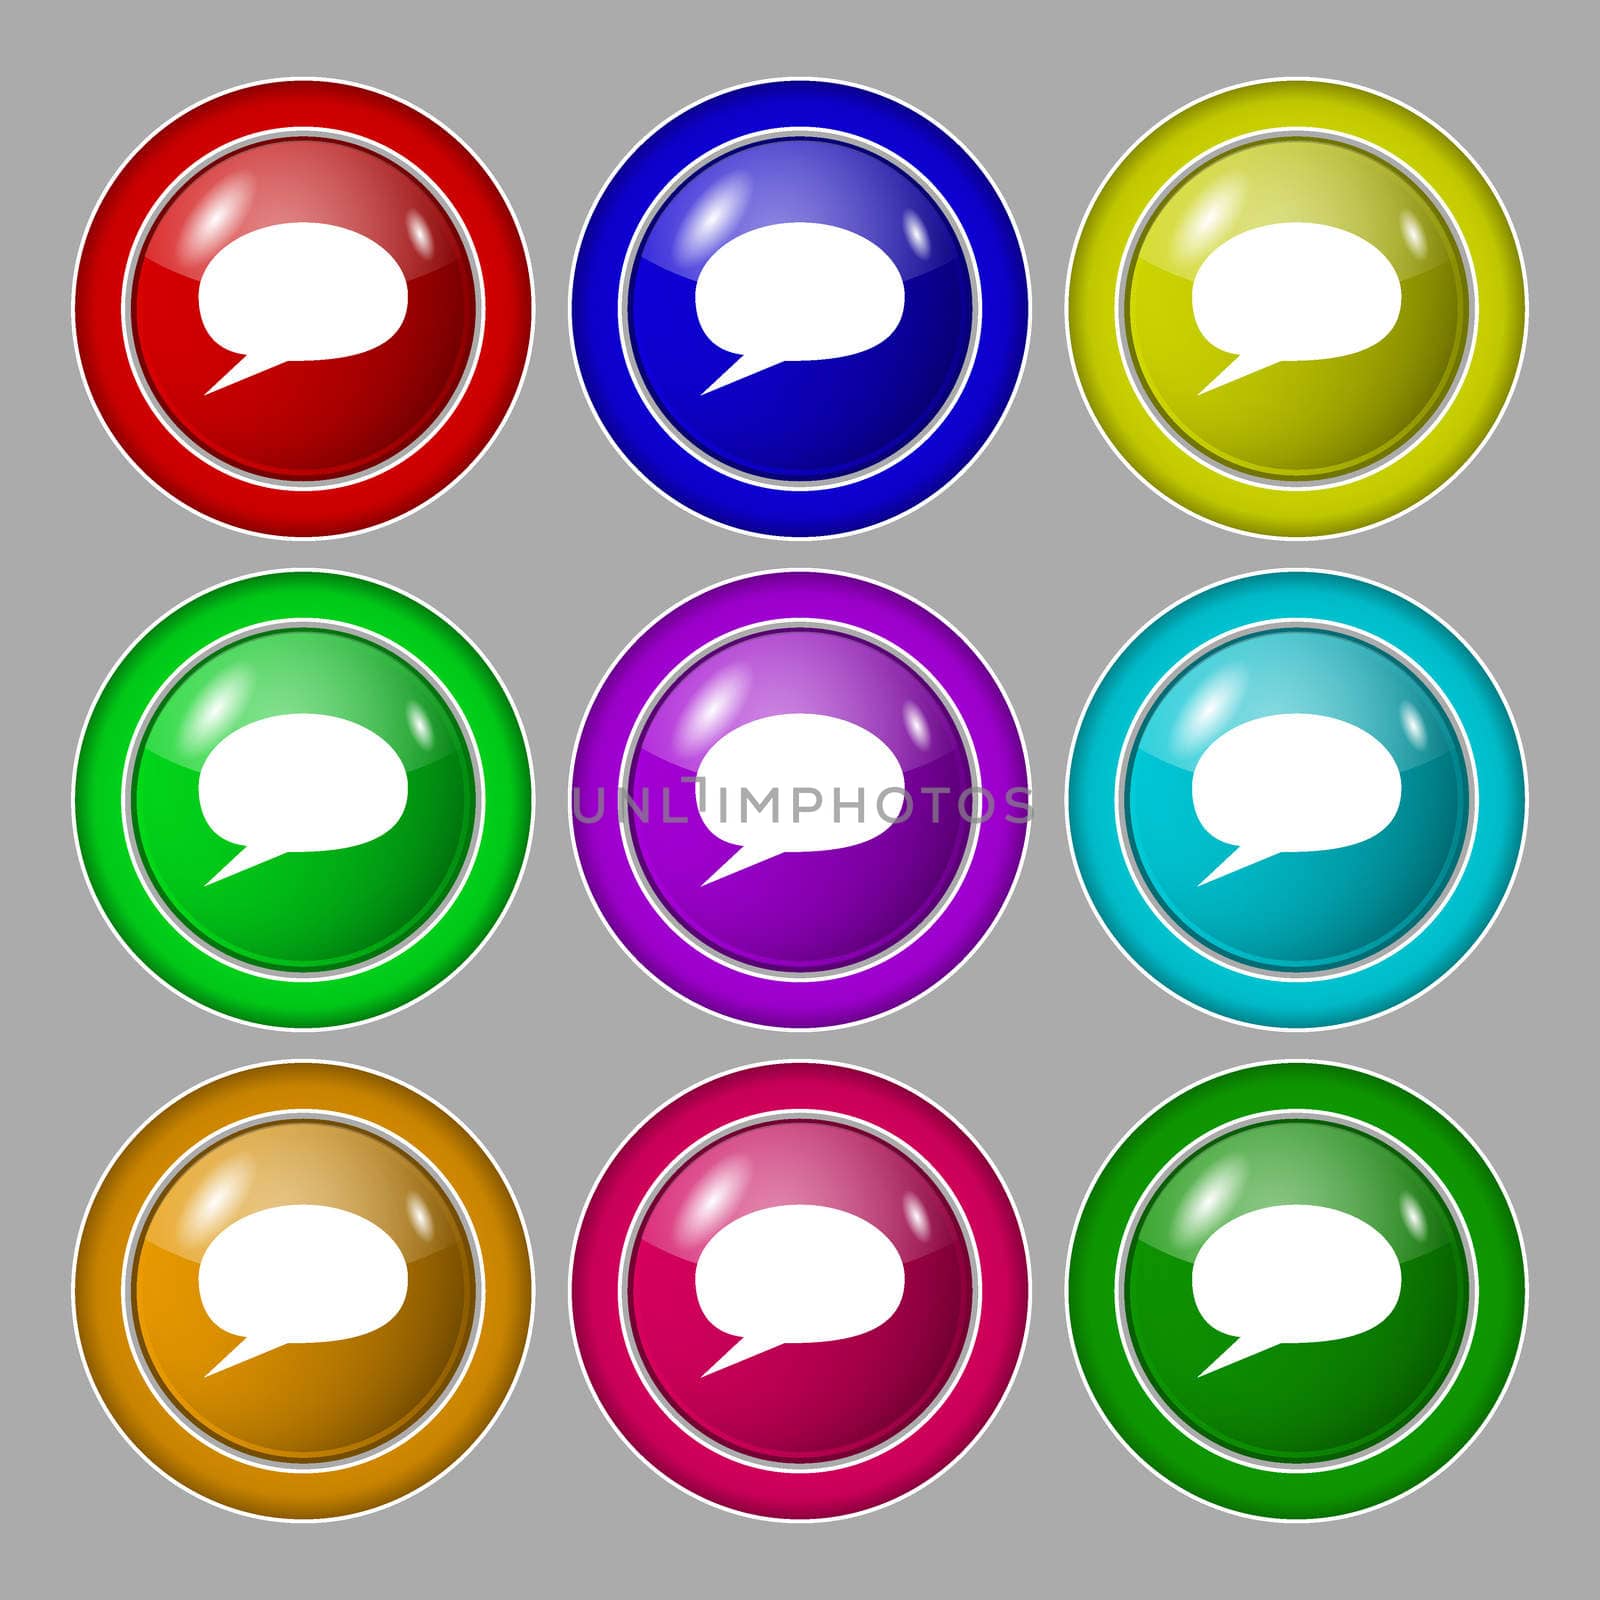 Speech bubble icons. Think cloud symbols. Symbol on nine round colourful buttons. illustration